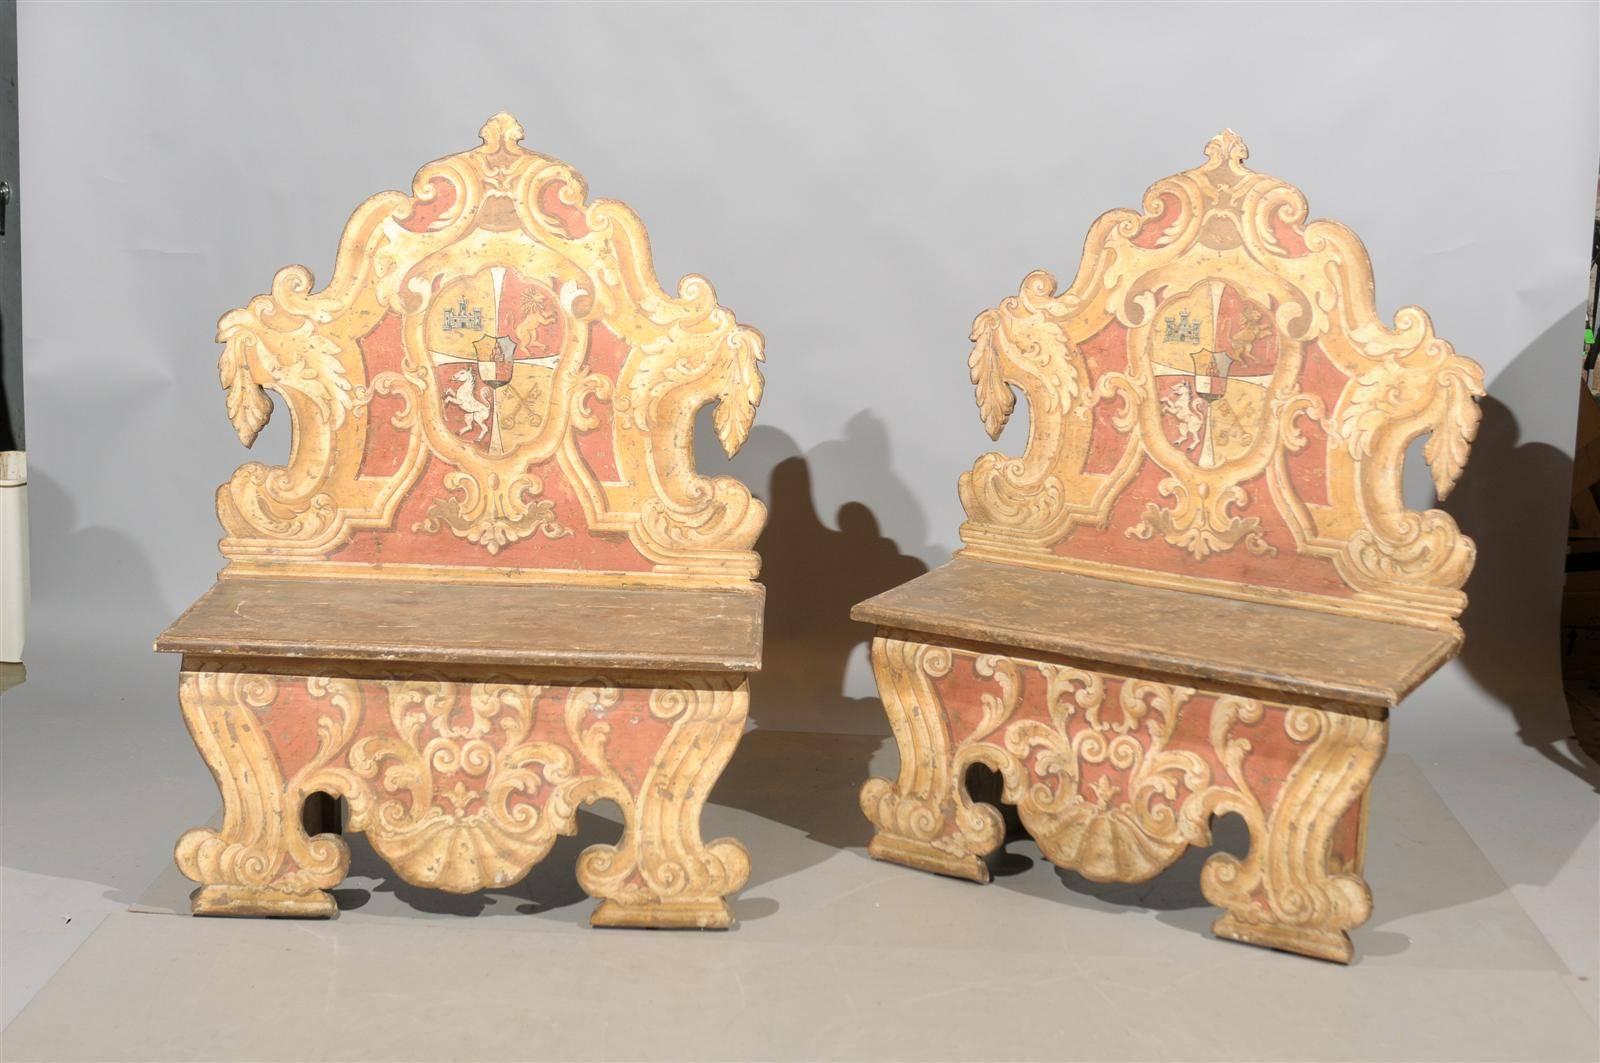 Pair of painted Italian benches with crests, Tuscany, 19th century.